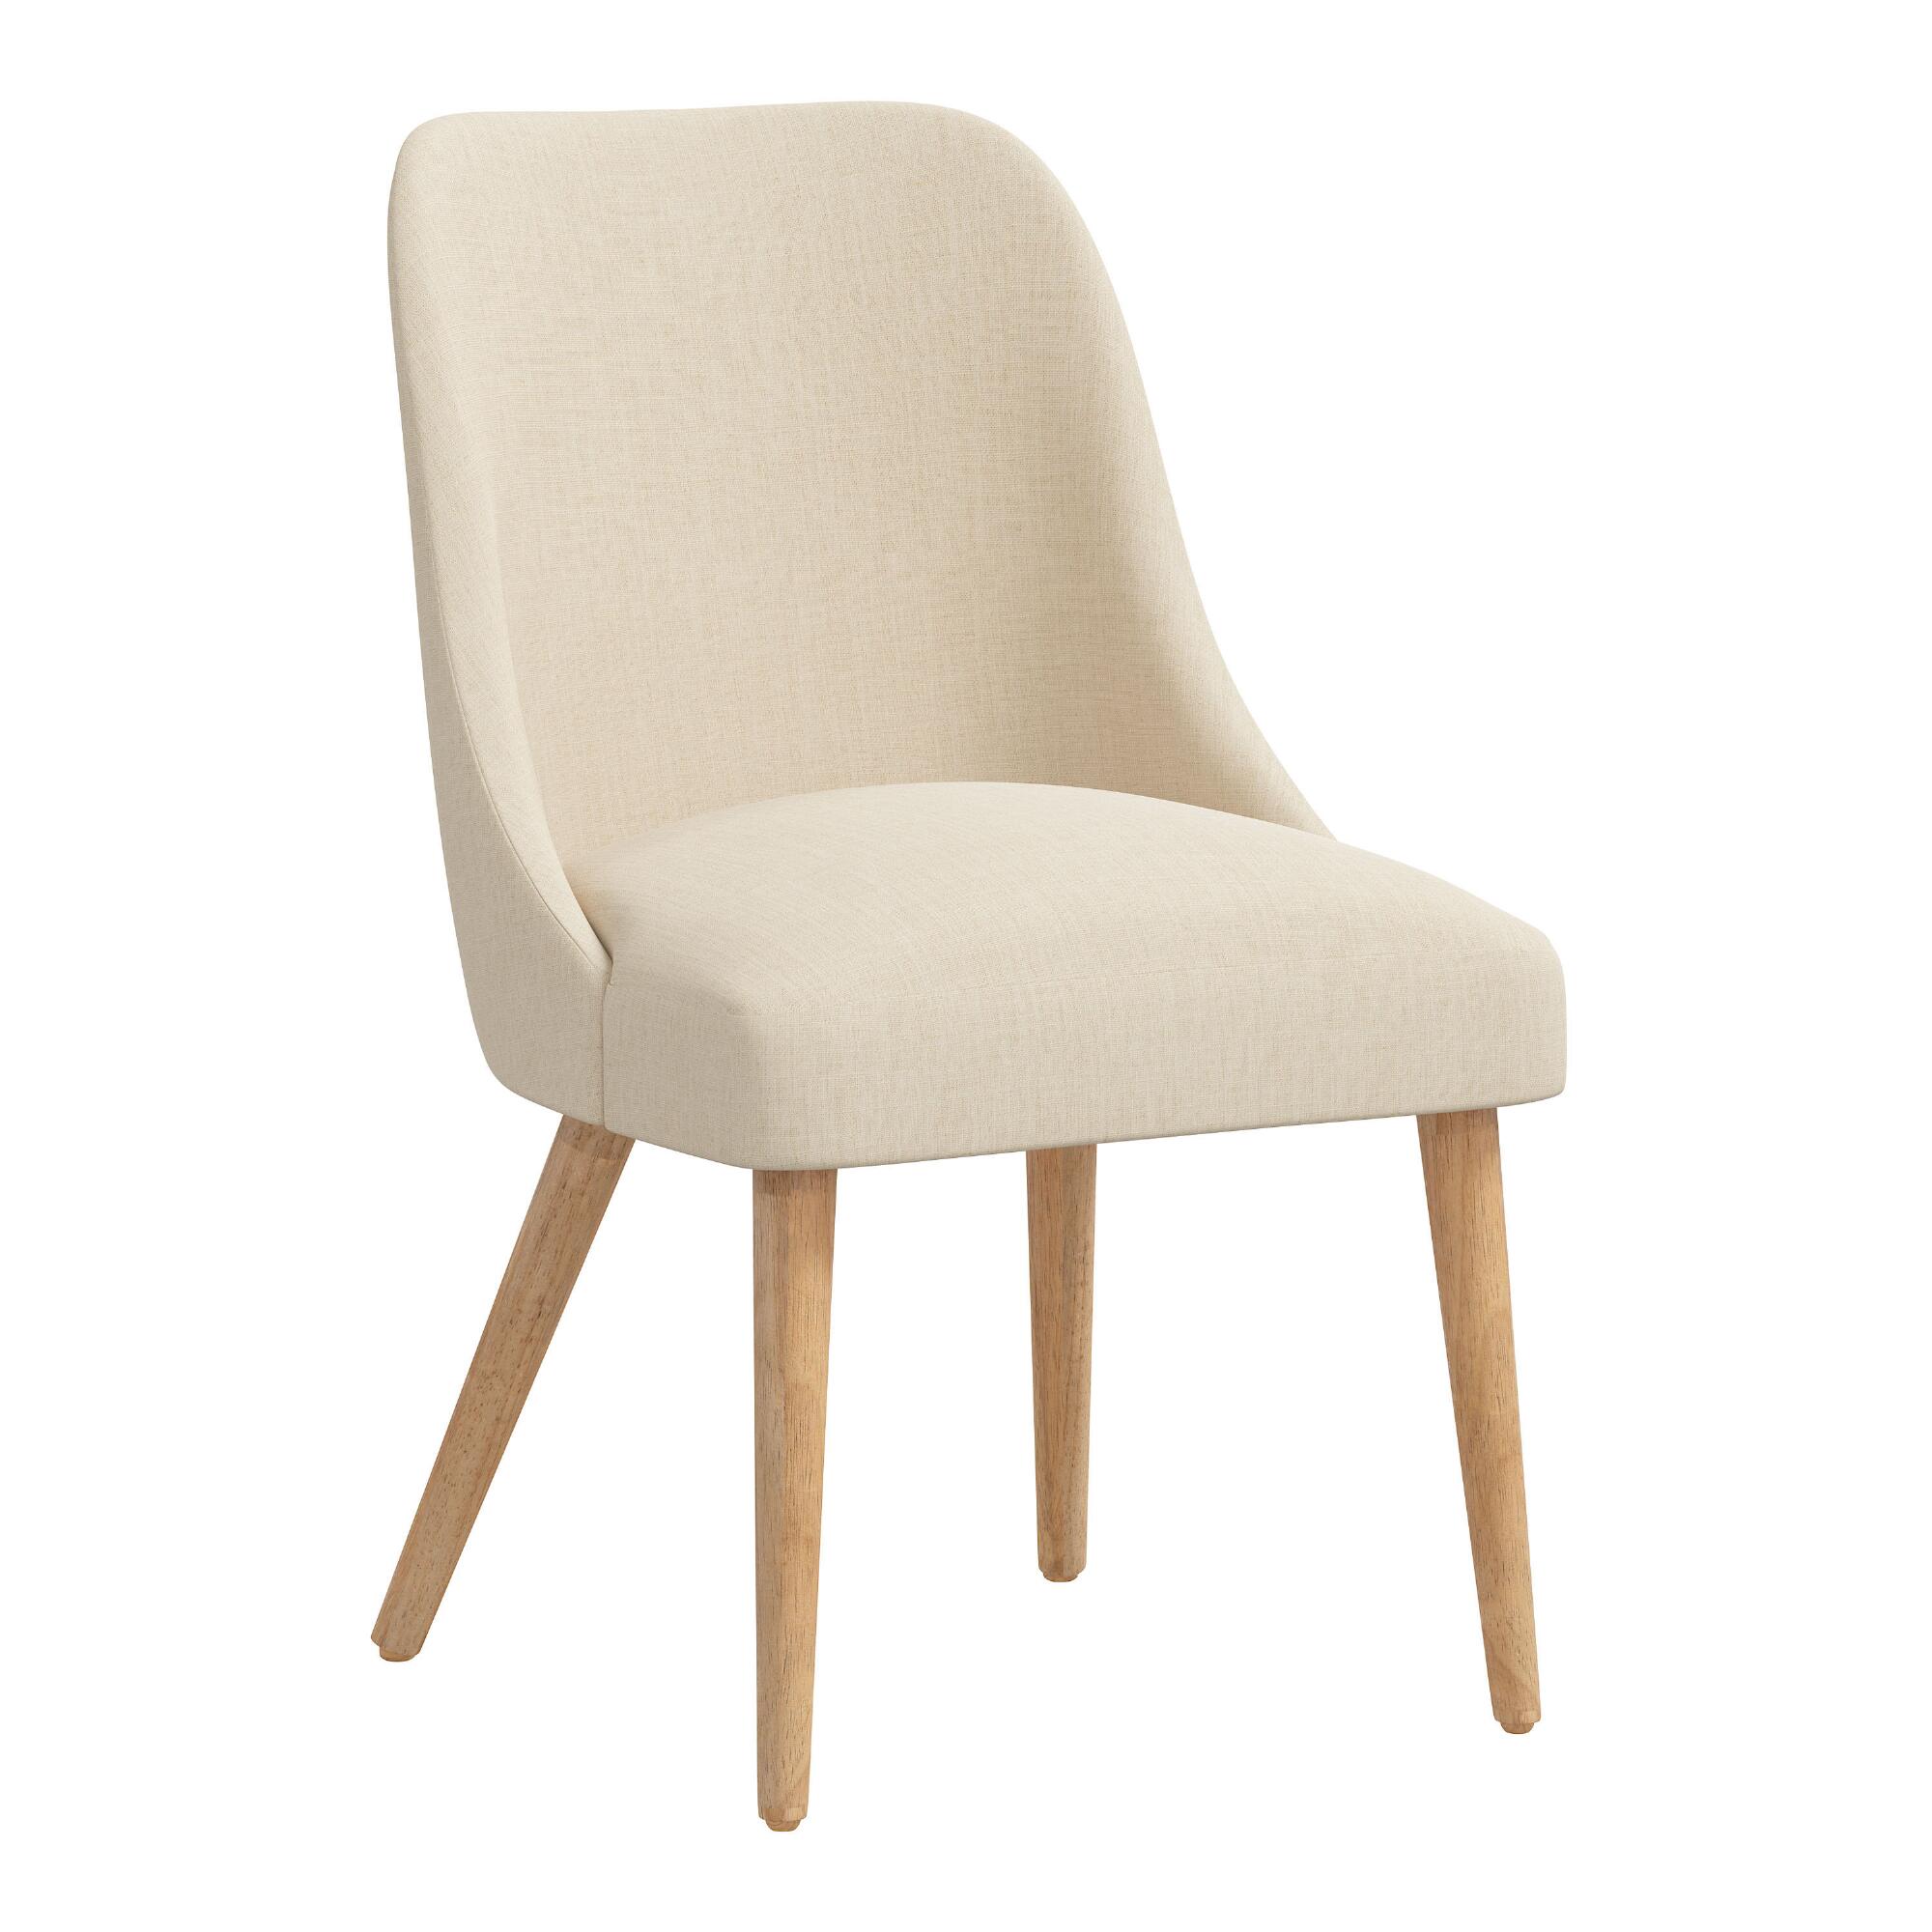 Linen Kian Upholstered Dining Chair: Natural by World Market